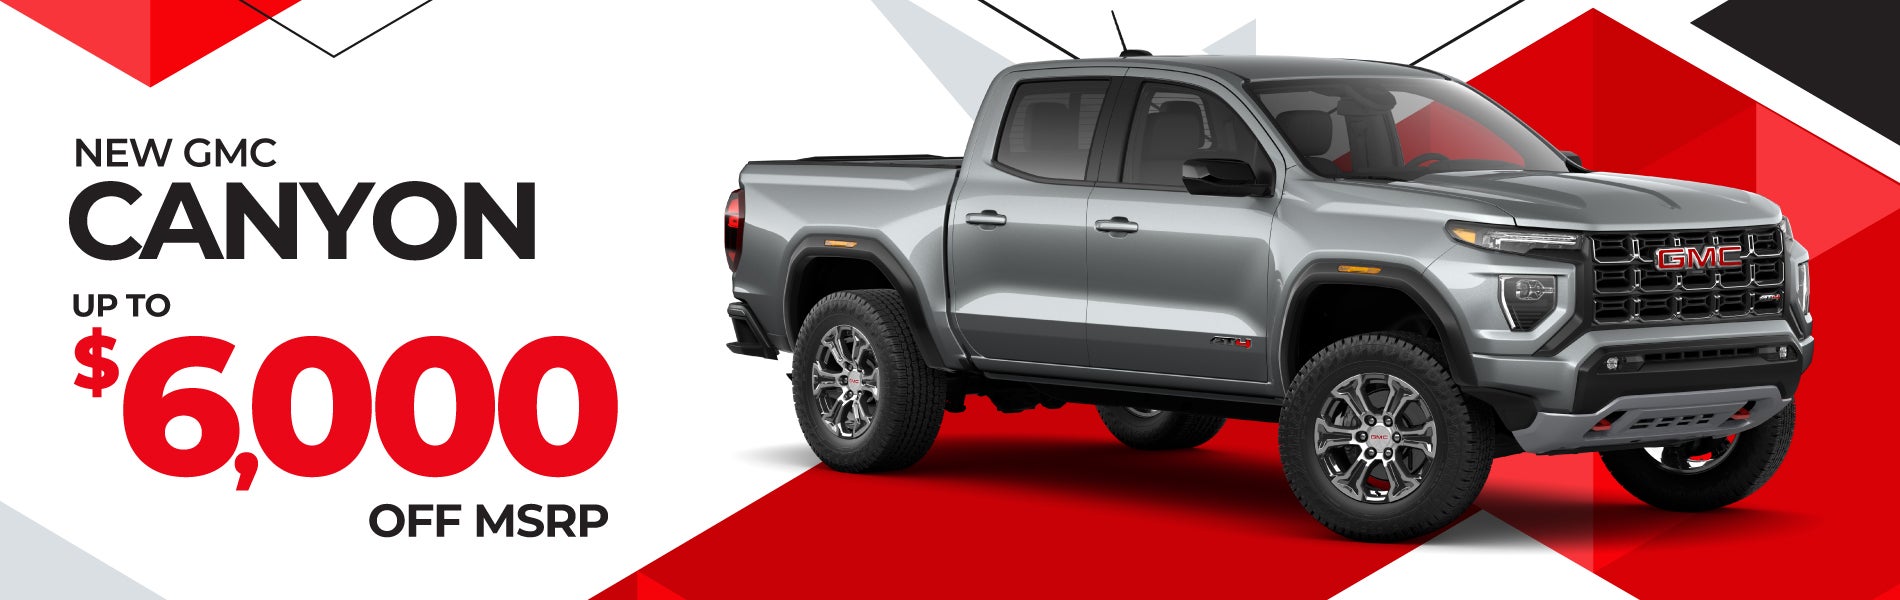 New GMC Canyon - up to $5,000 Off MSRP